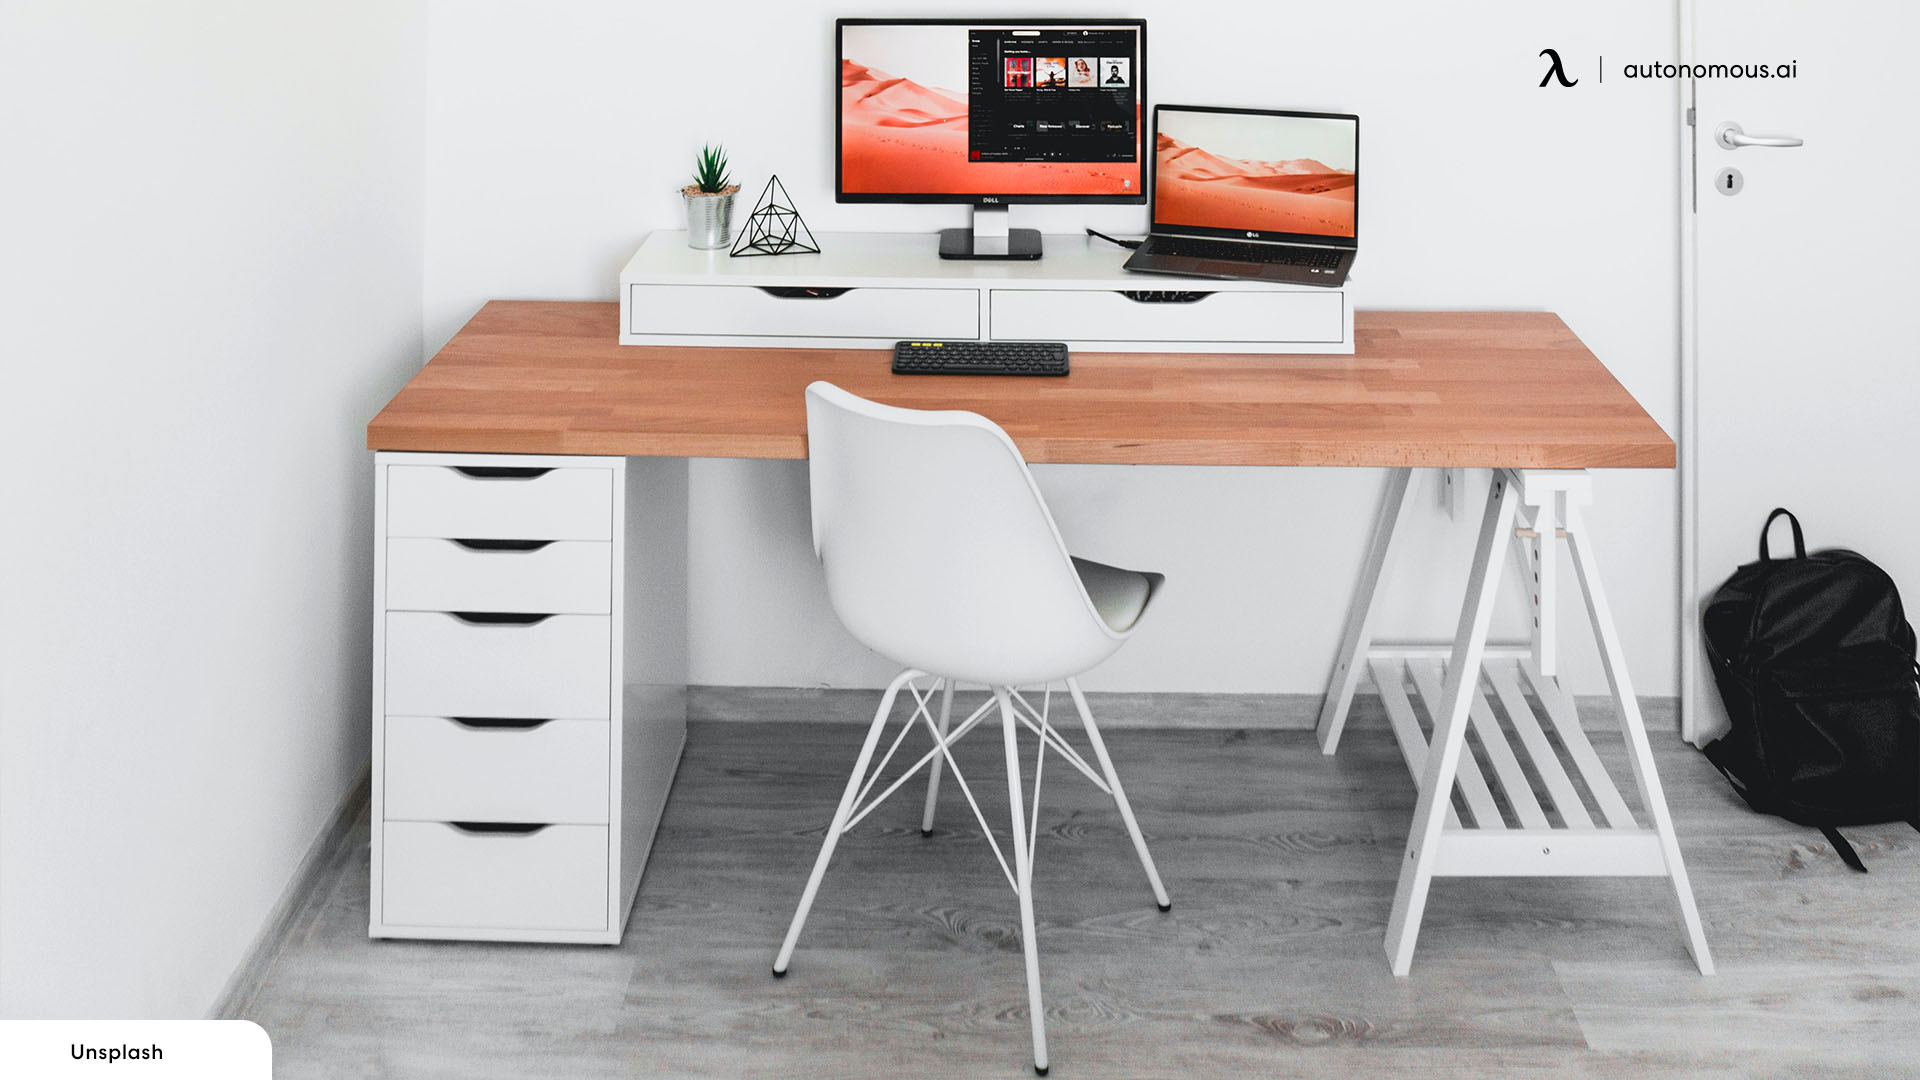 Simple Office Desk Design for a Minimalist Home Office Look